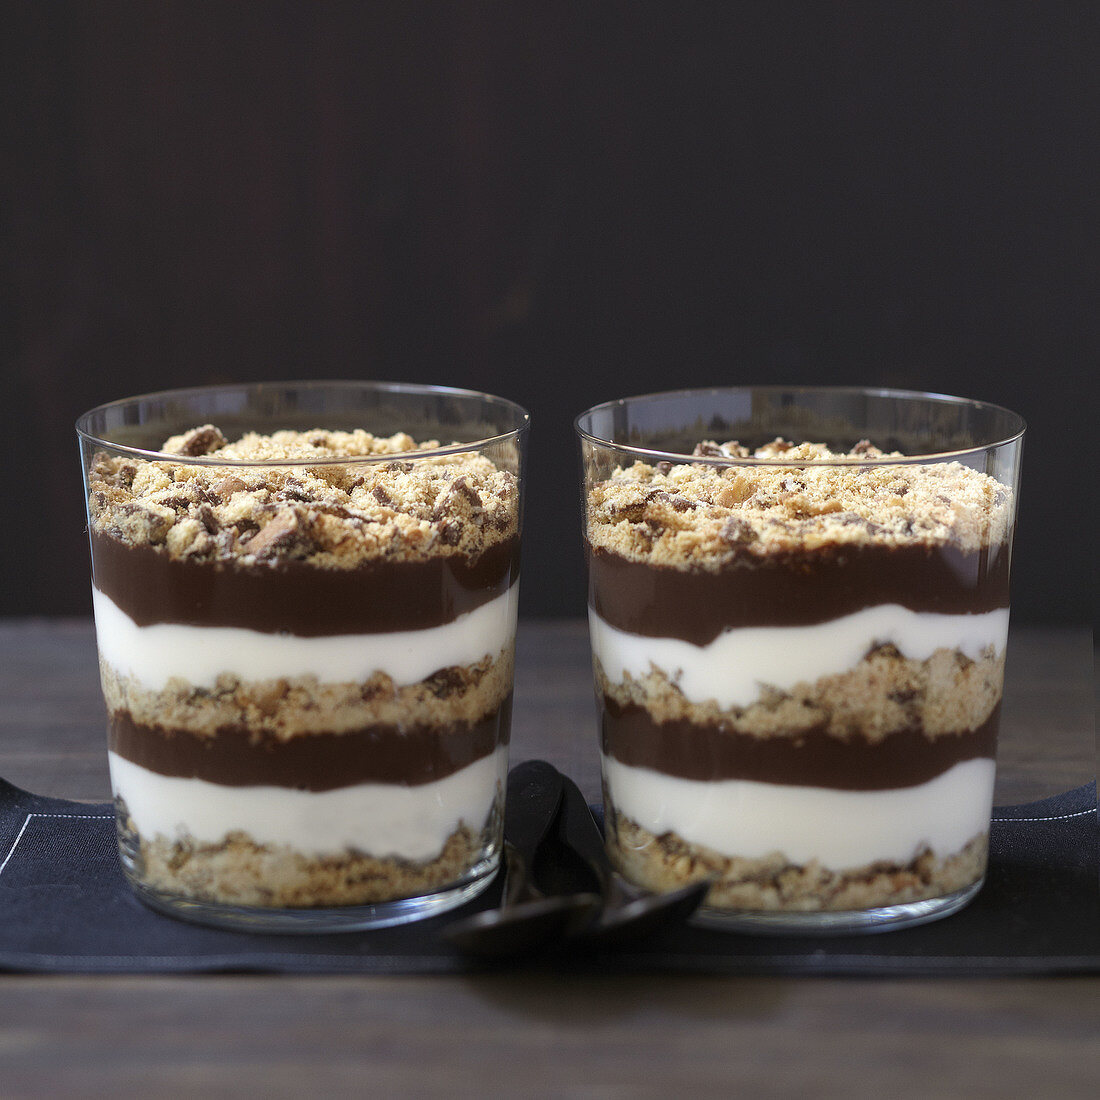 Fromage frais, chocolate Danette and crushed cookie trifle